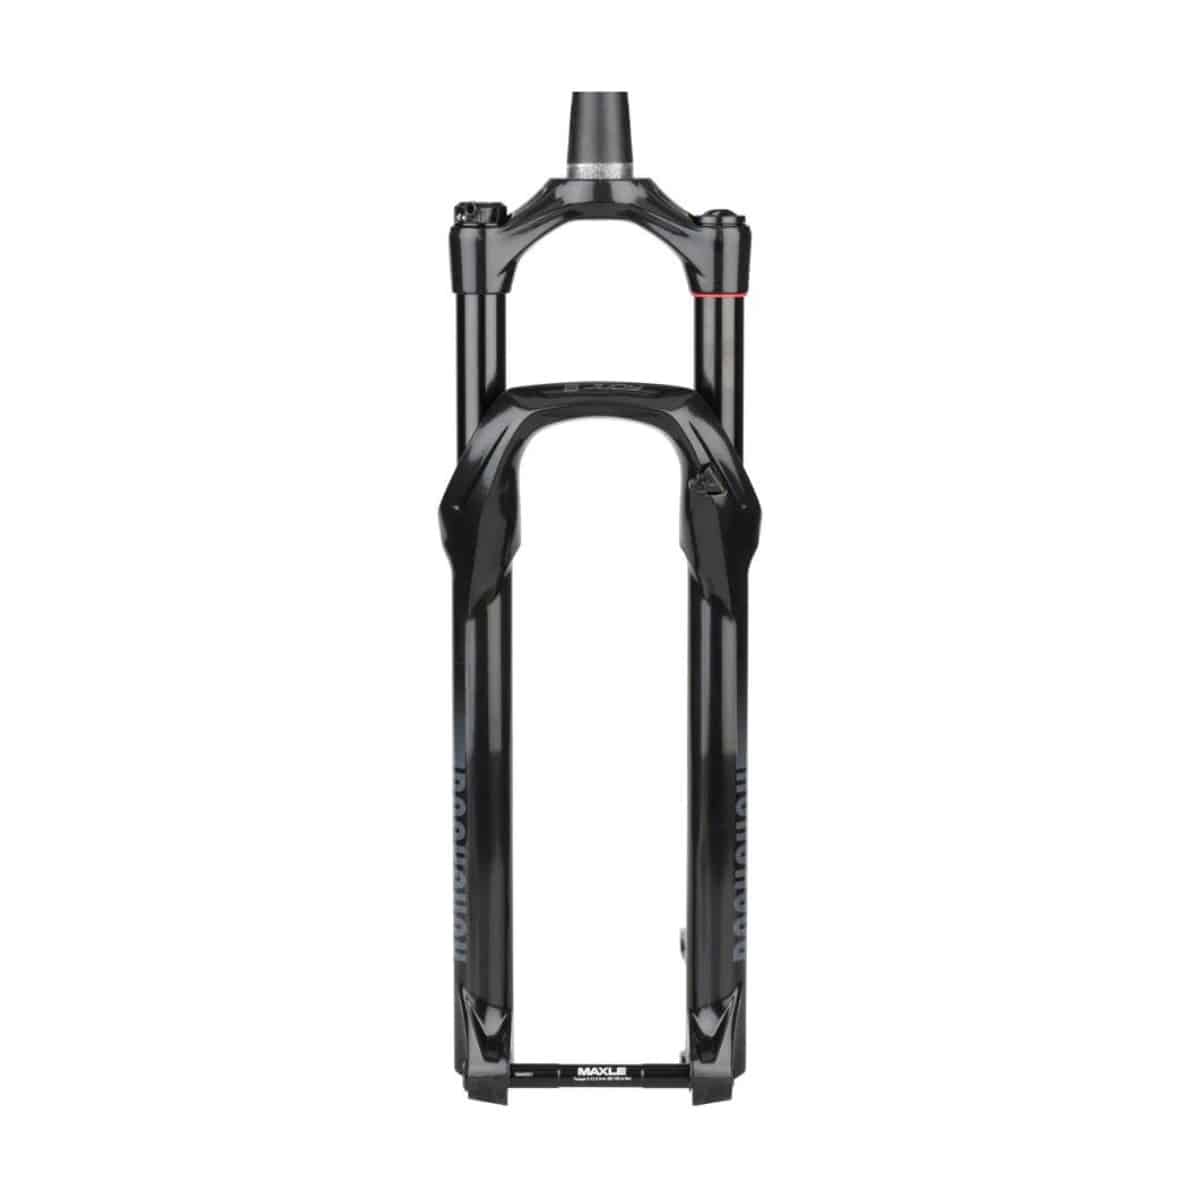 Suspension 29 RockShox Judy Gold RL Control Remoto Aire Conica, 100 mm, 9x100 mm, 51 mm Offset, A3 negro [00.4020.556.022] 